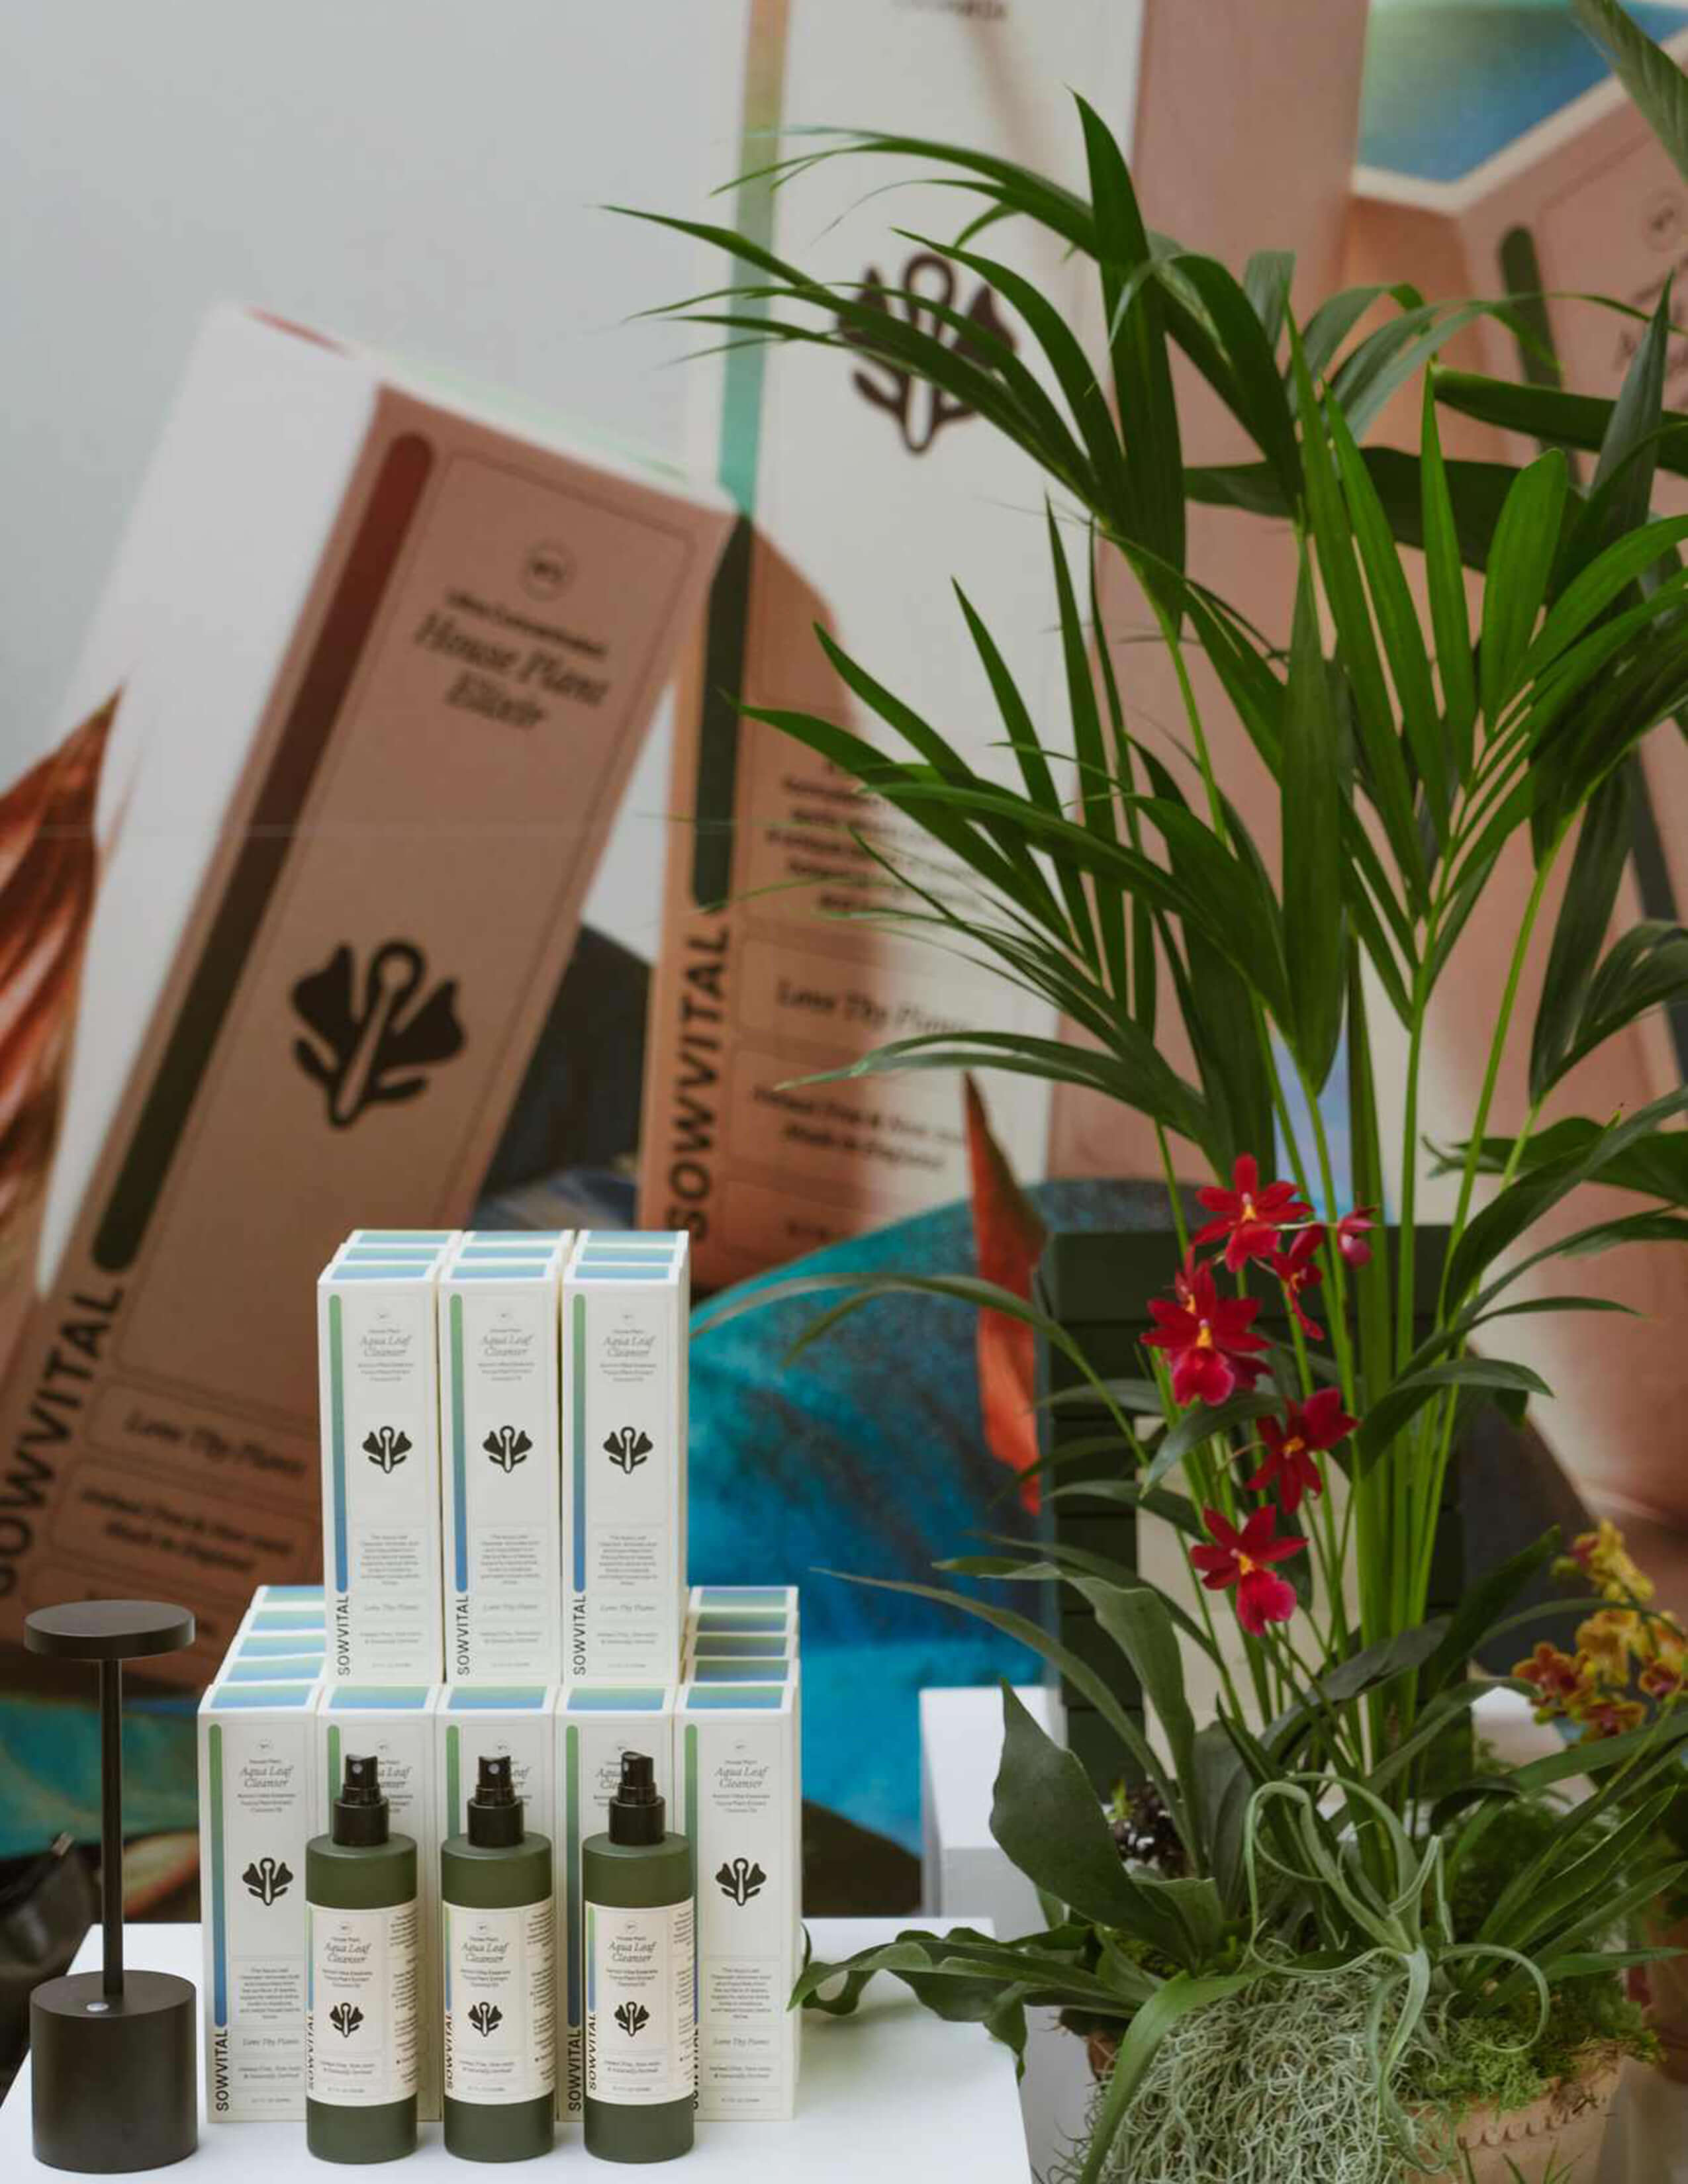 The Sowvital house plant product - Aqua leaf cleanser with packaging boxes next to a big pot of plants that has some red flowers among it and there’s the product campaign posters behind on the wall.